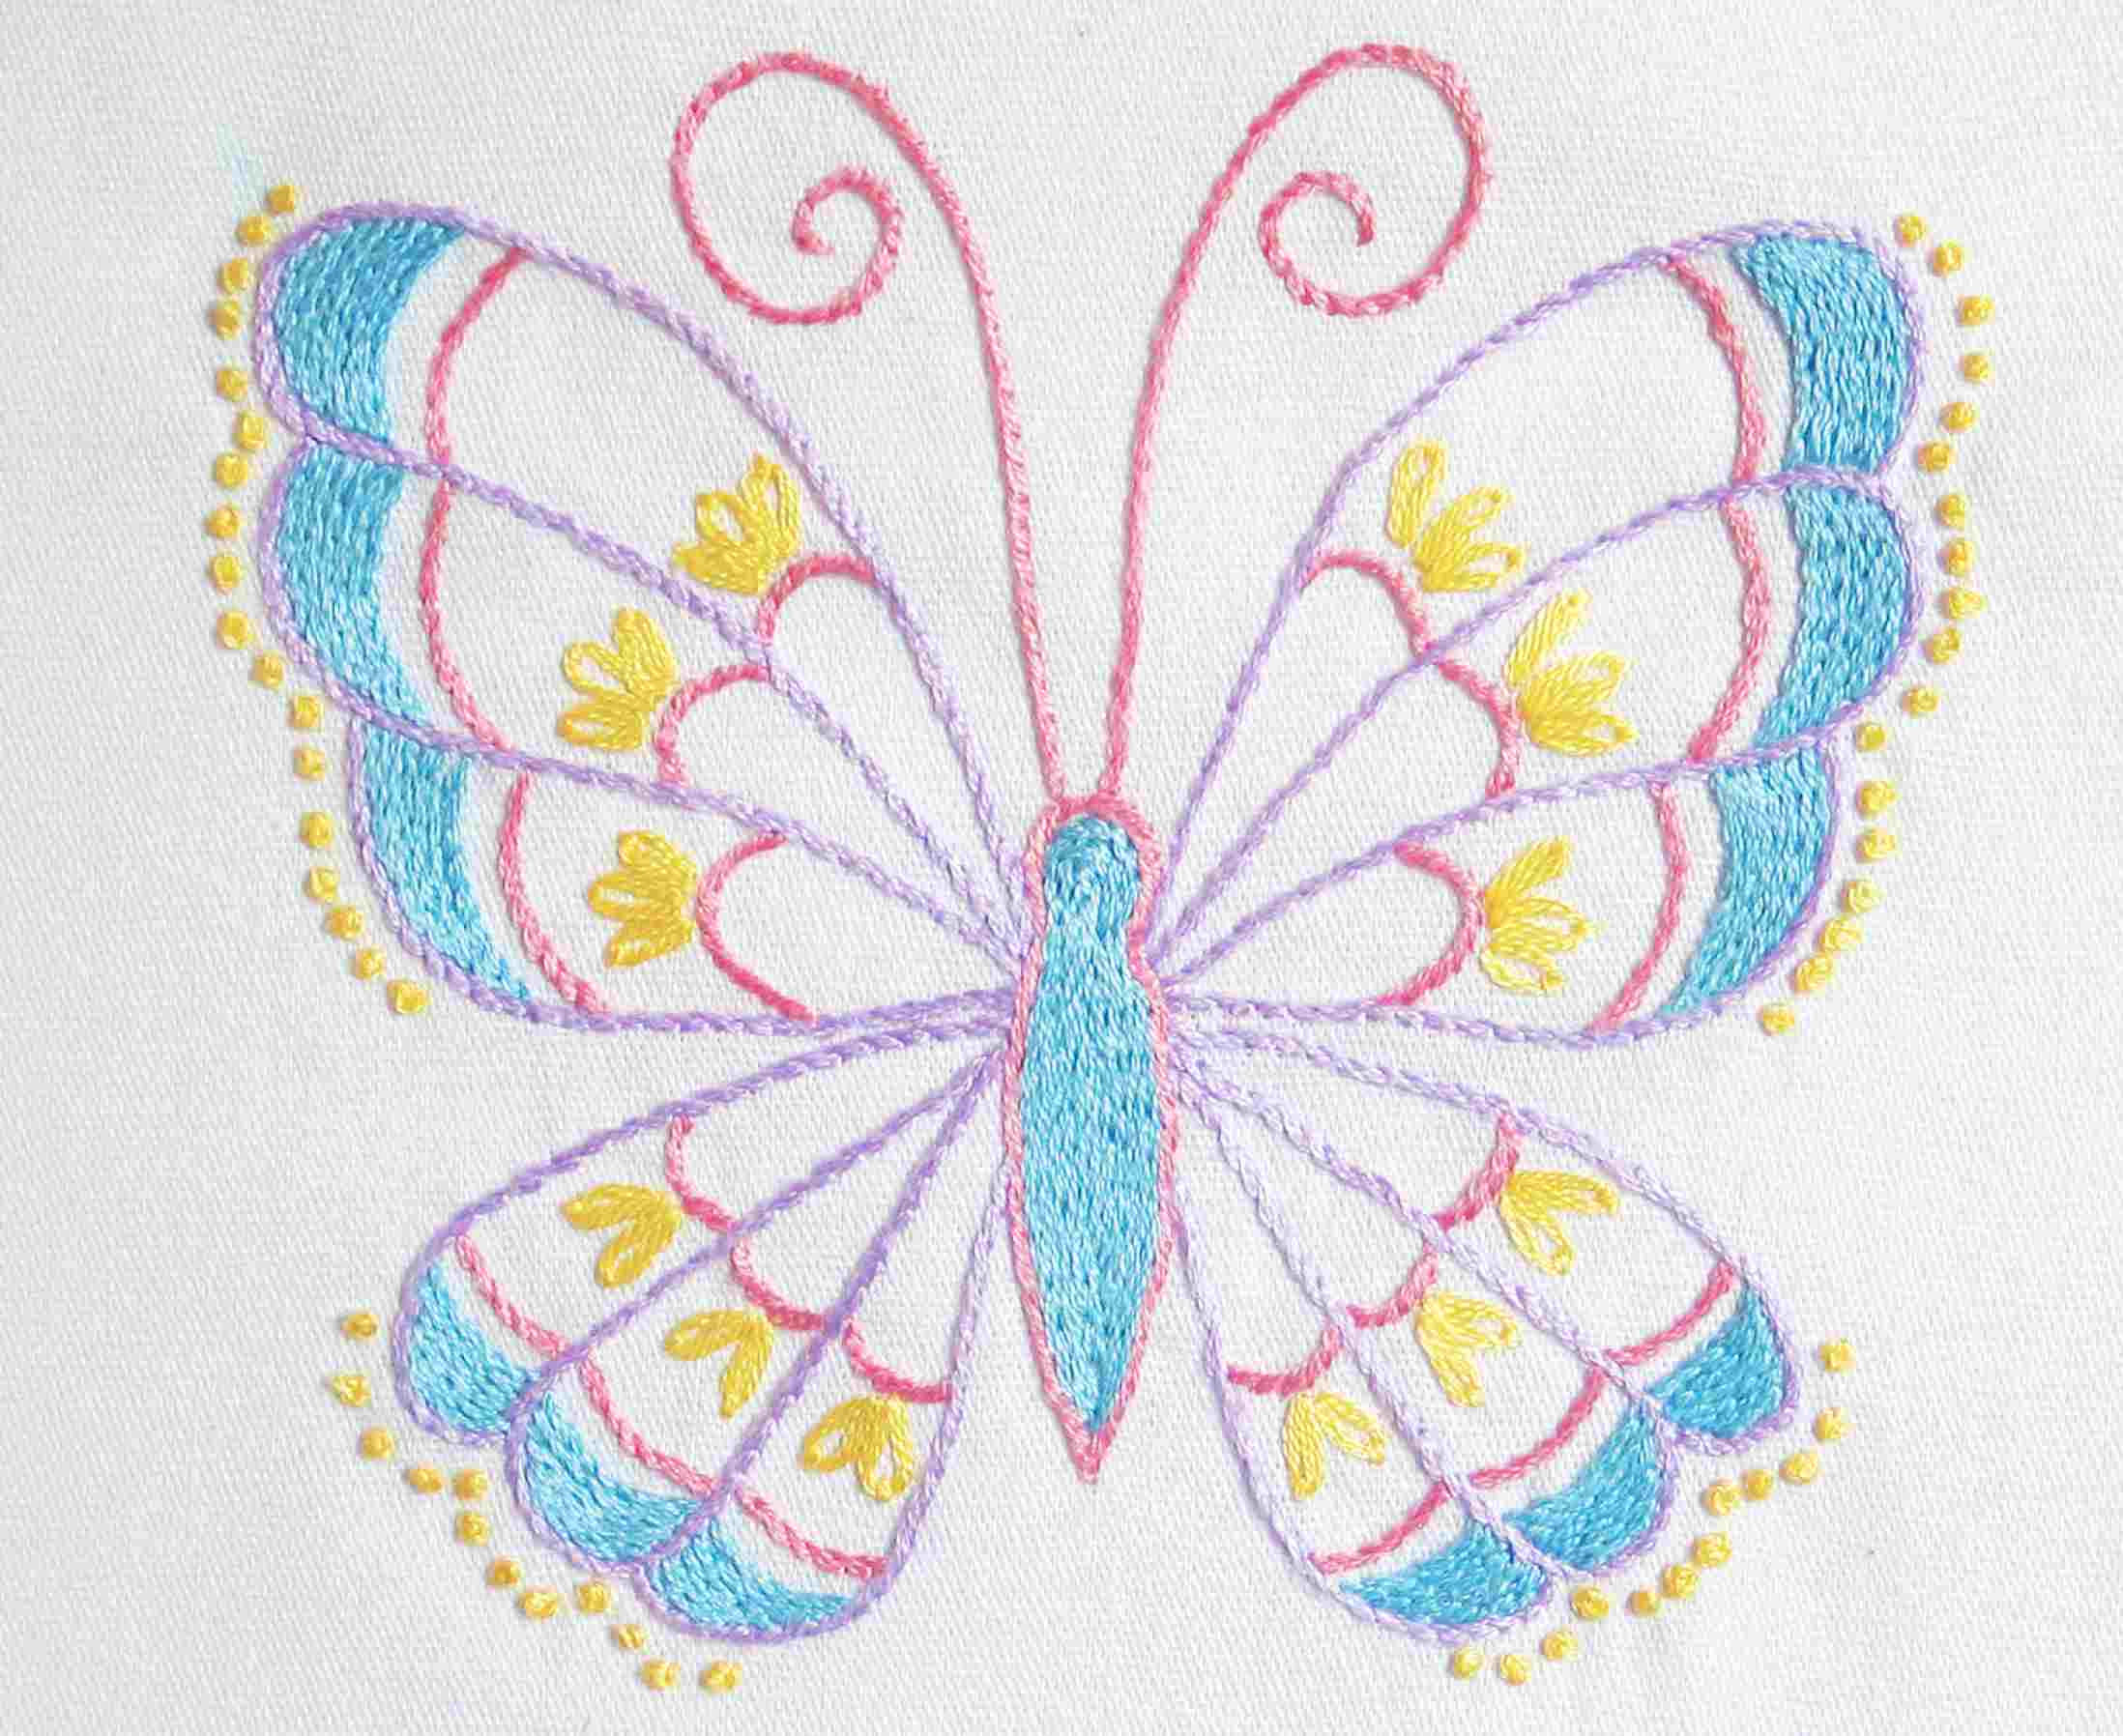 Chicken Embroidery Patterns Free Our Top 25 Free Embroidery Designs